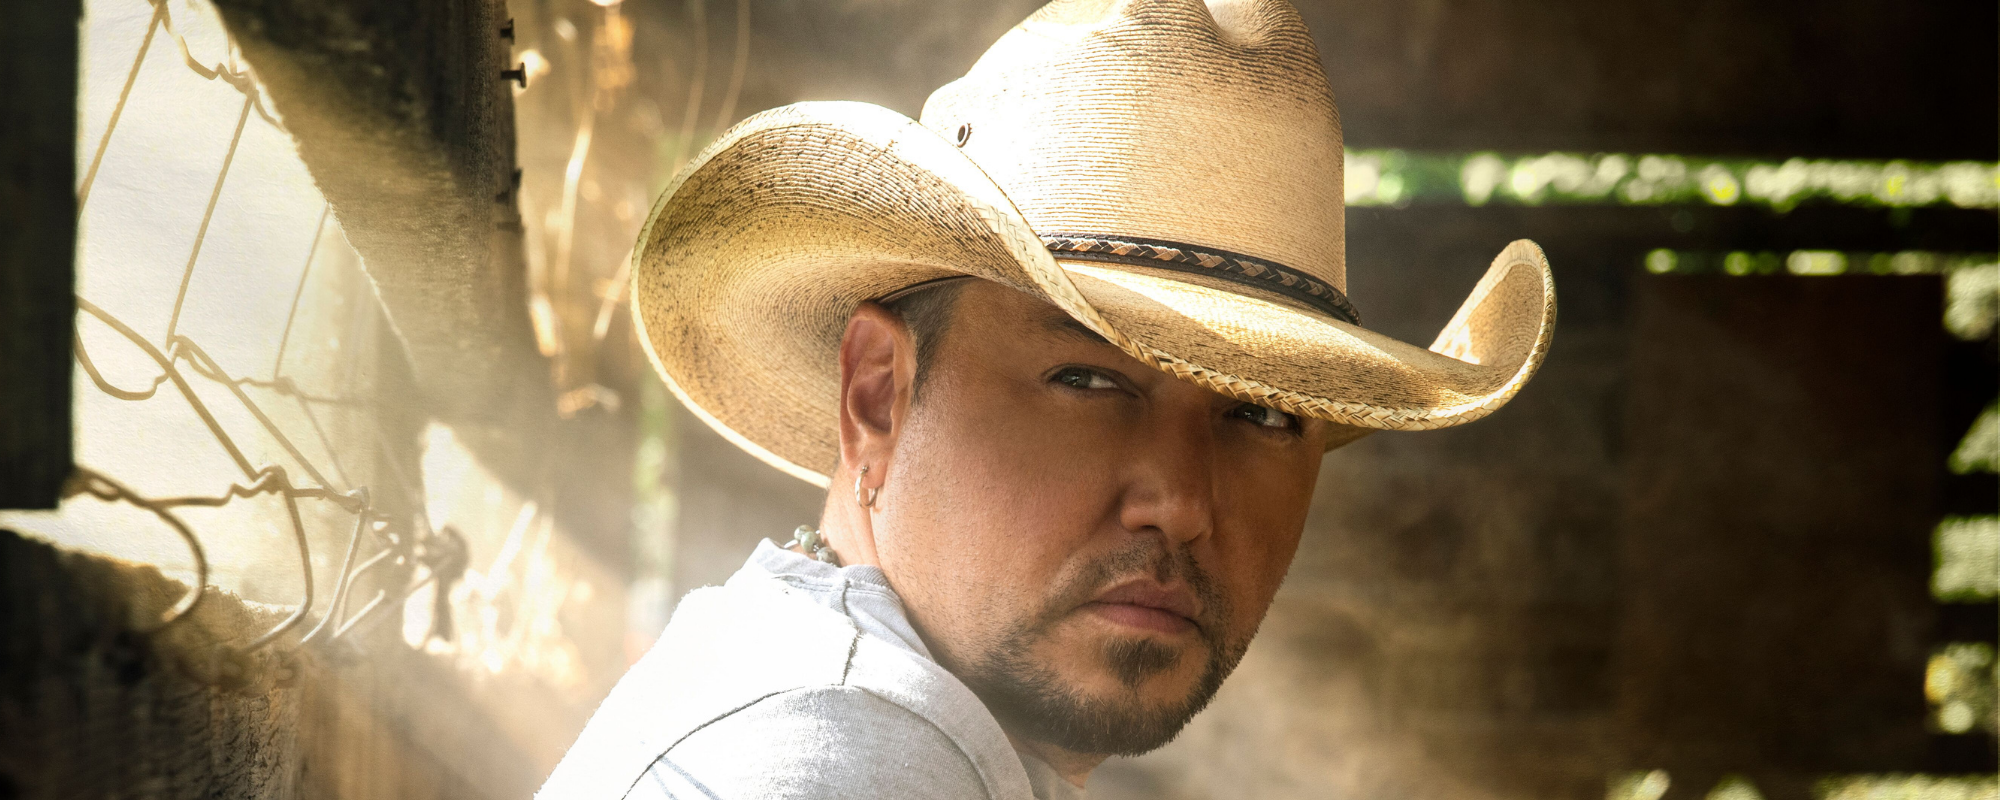 Jason Aldean Rolls Out His 10th Album ‘Macon, Georgia’ With Plans to Share 30 New Songs